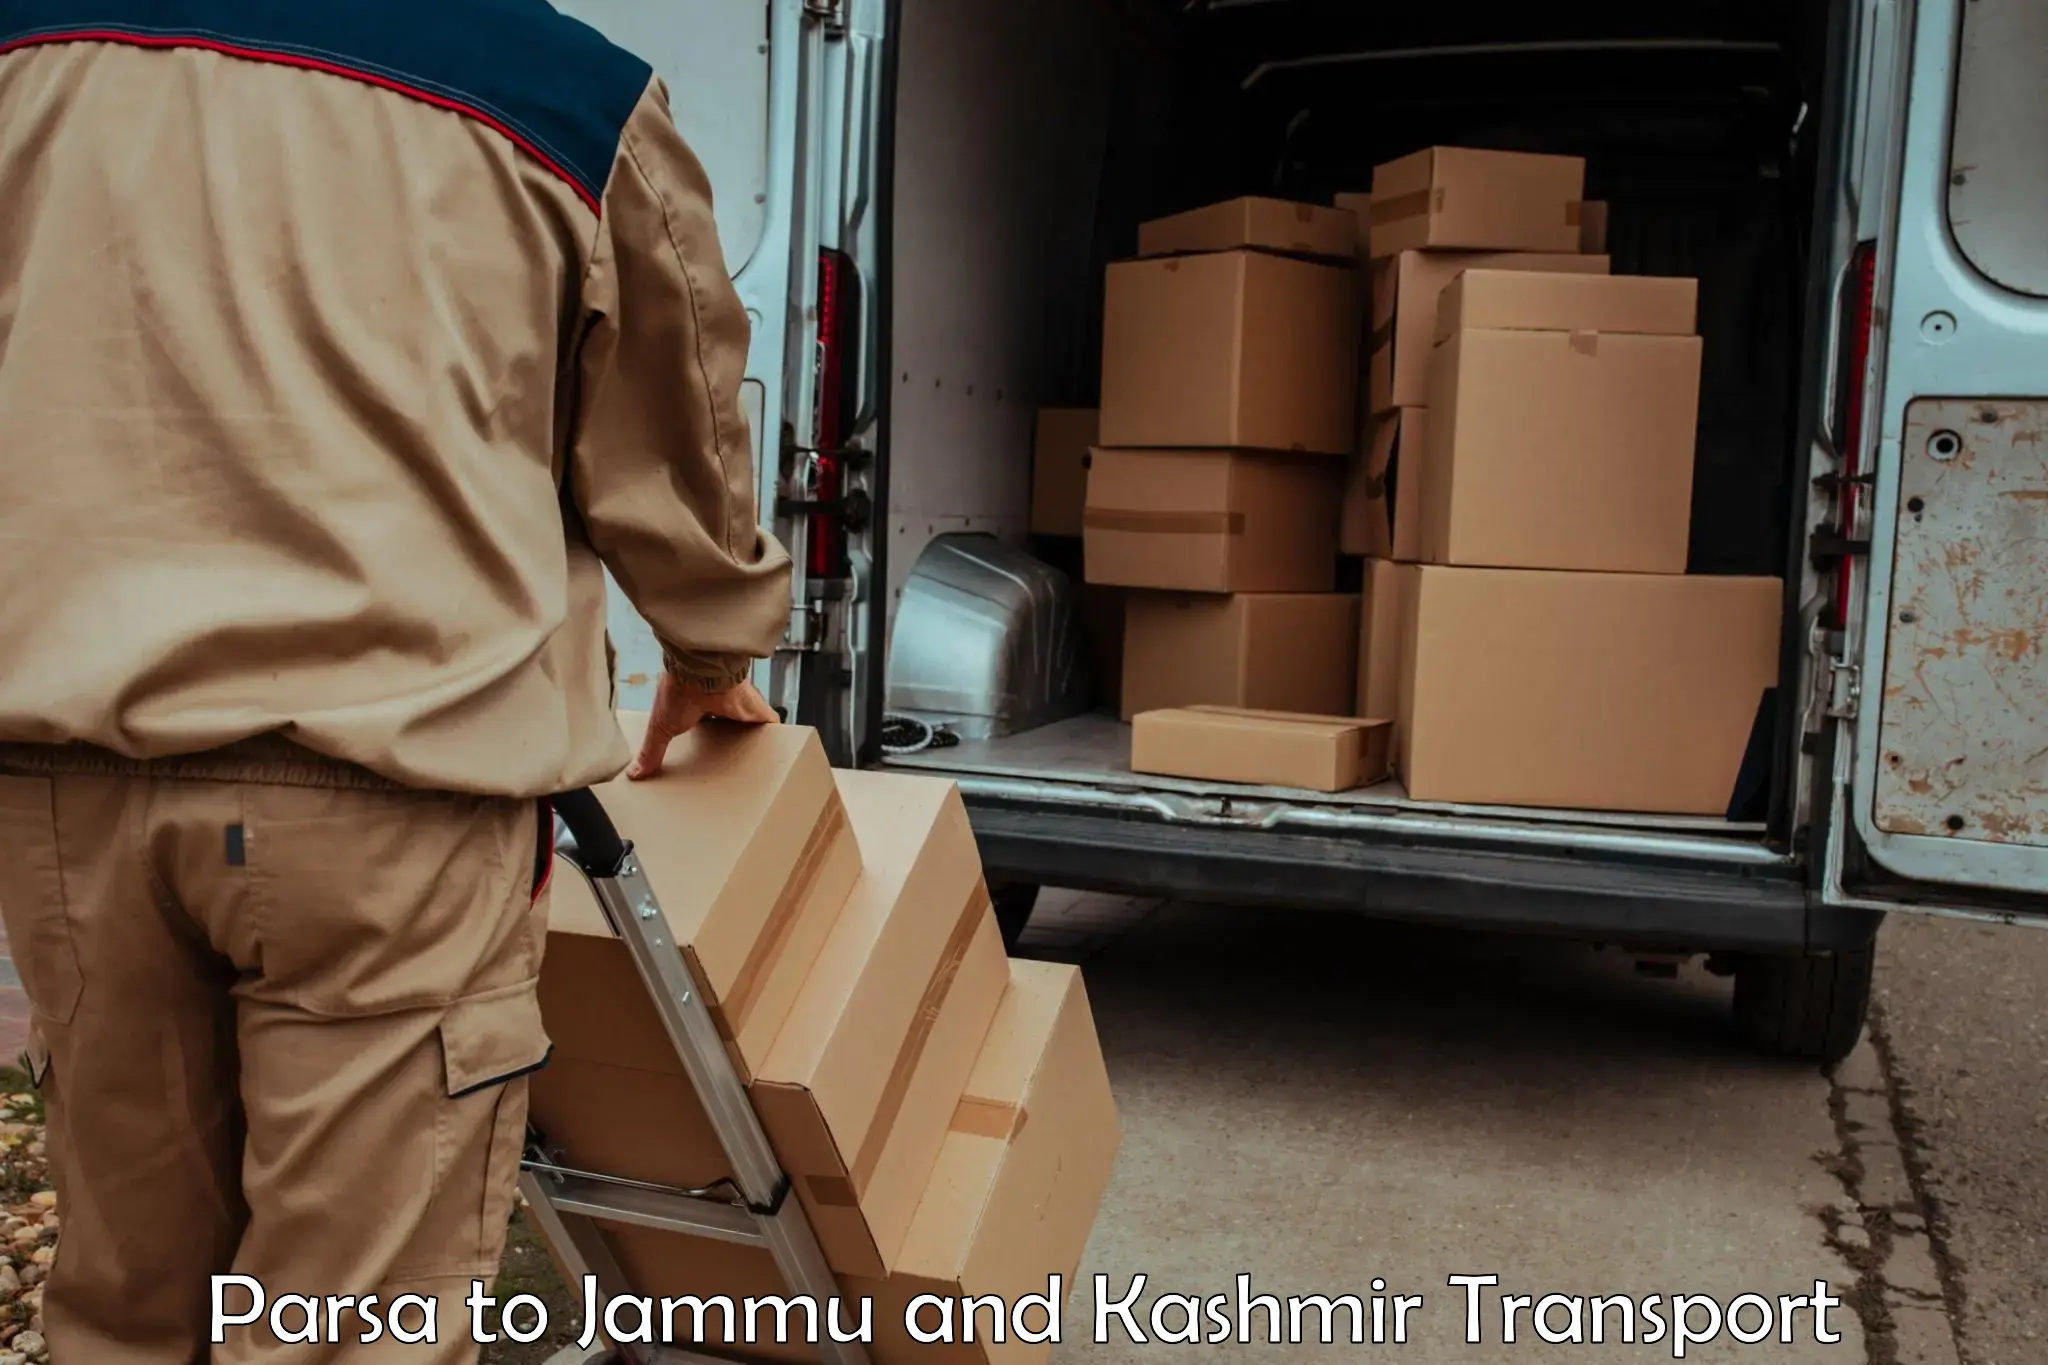 Truck transport companies in India Parsa to Katra